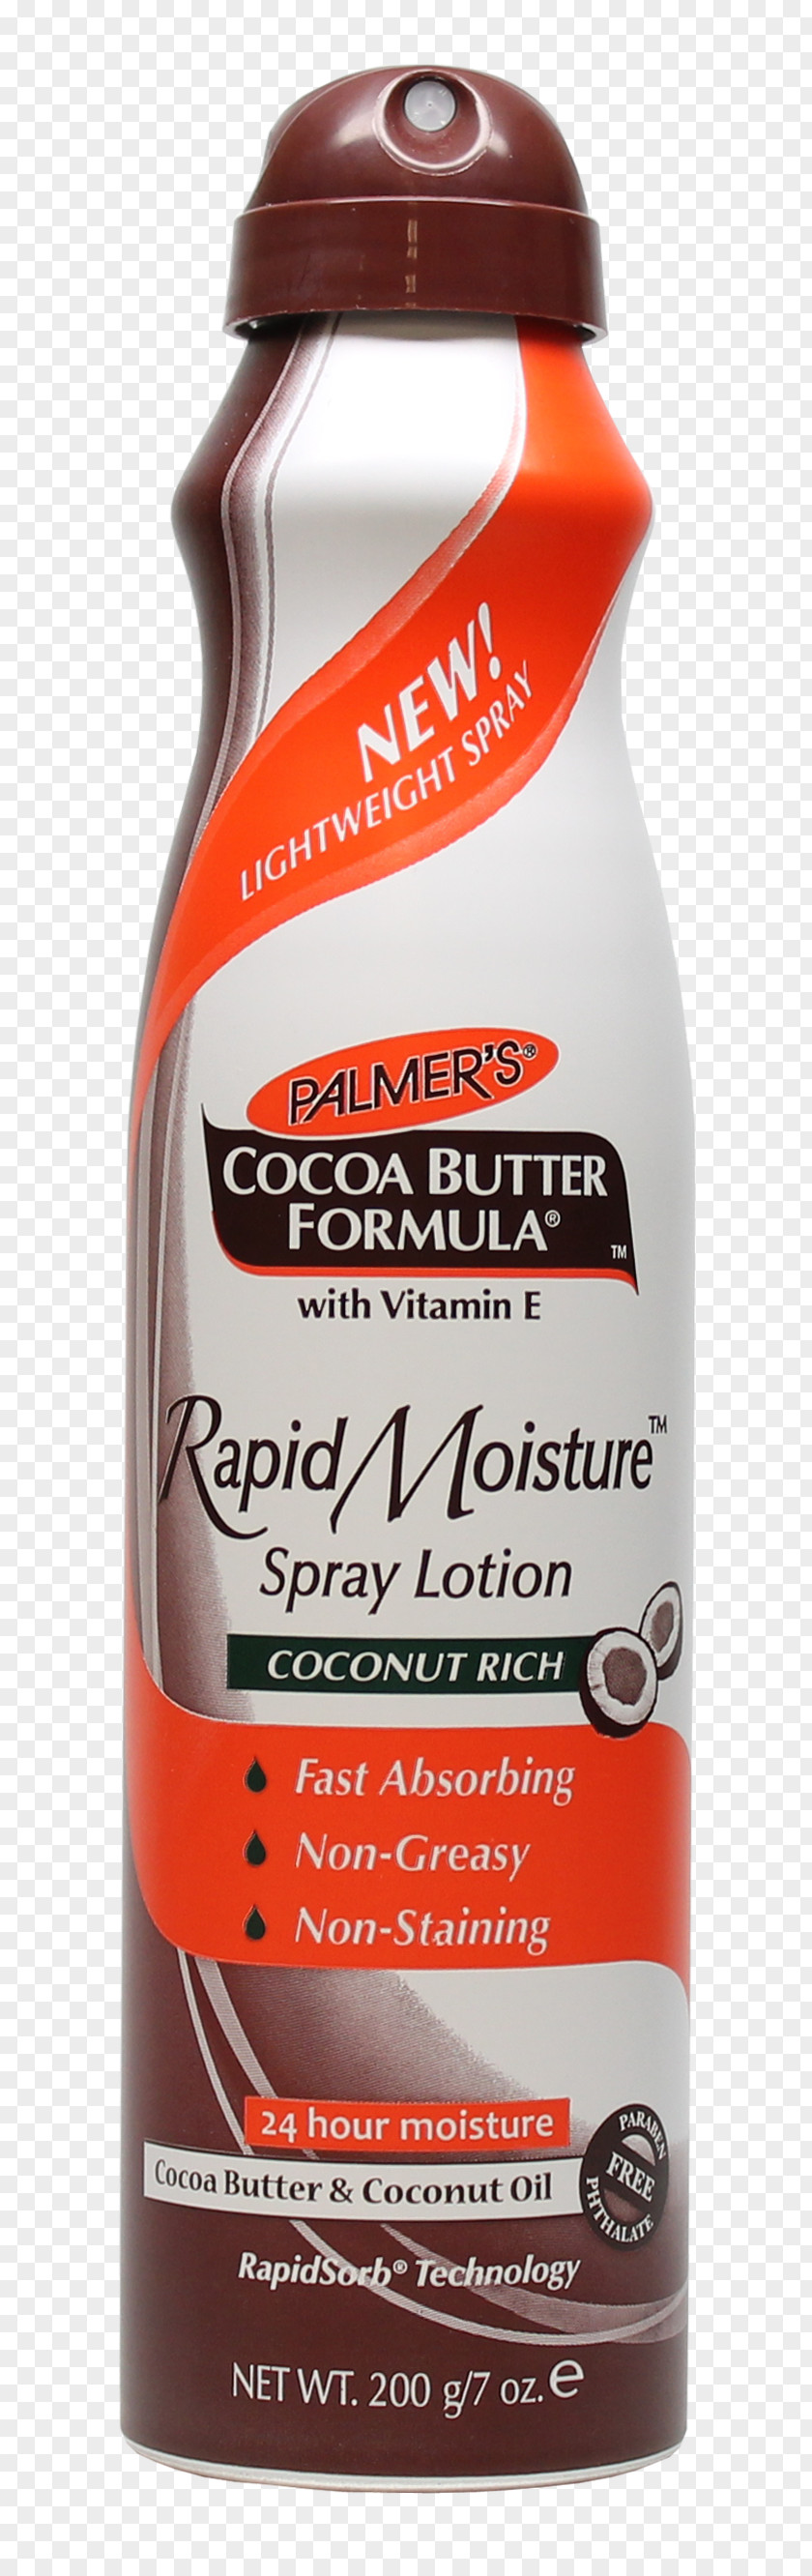 Cacao Peixe Igual Palmer's Cocoa Butter Formula Cream Soap Product Tree PNG